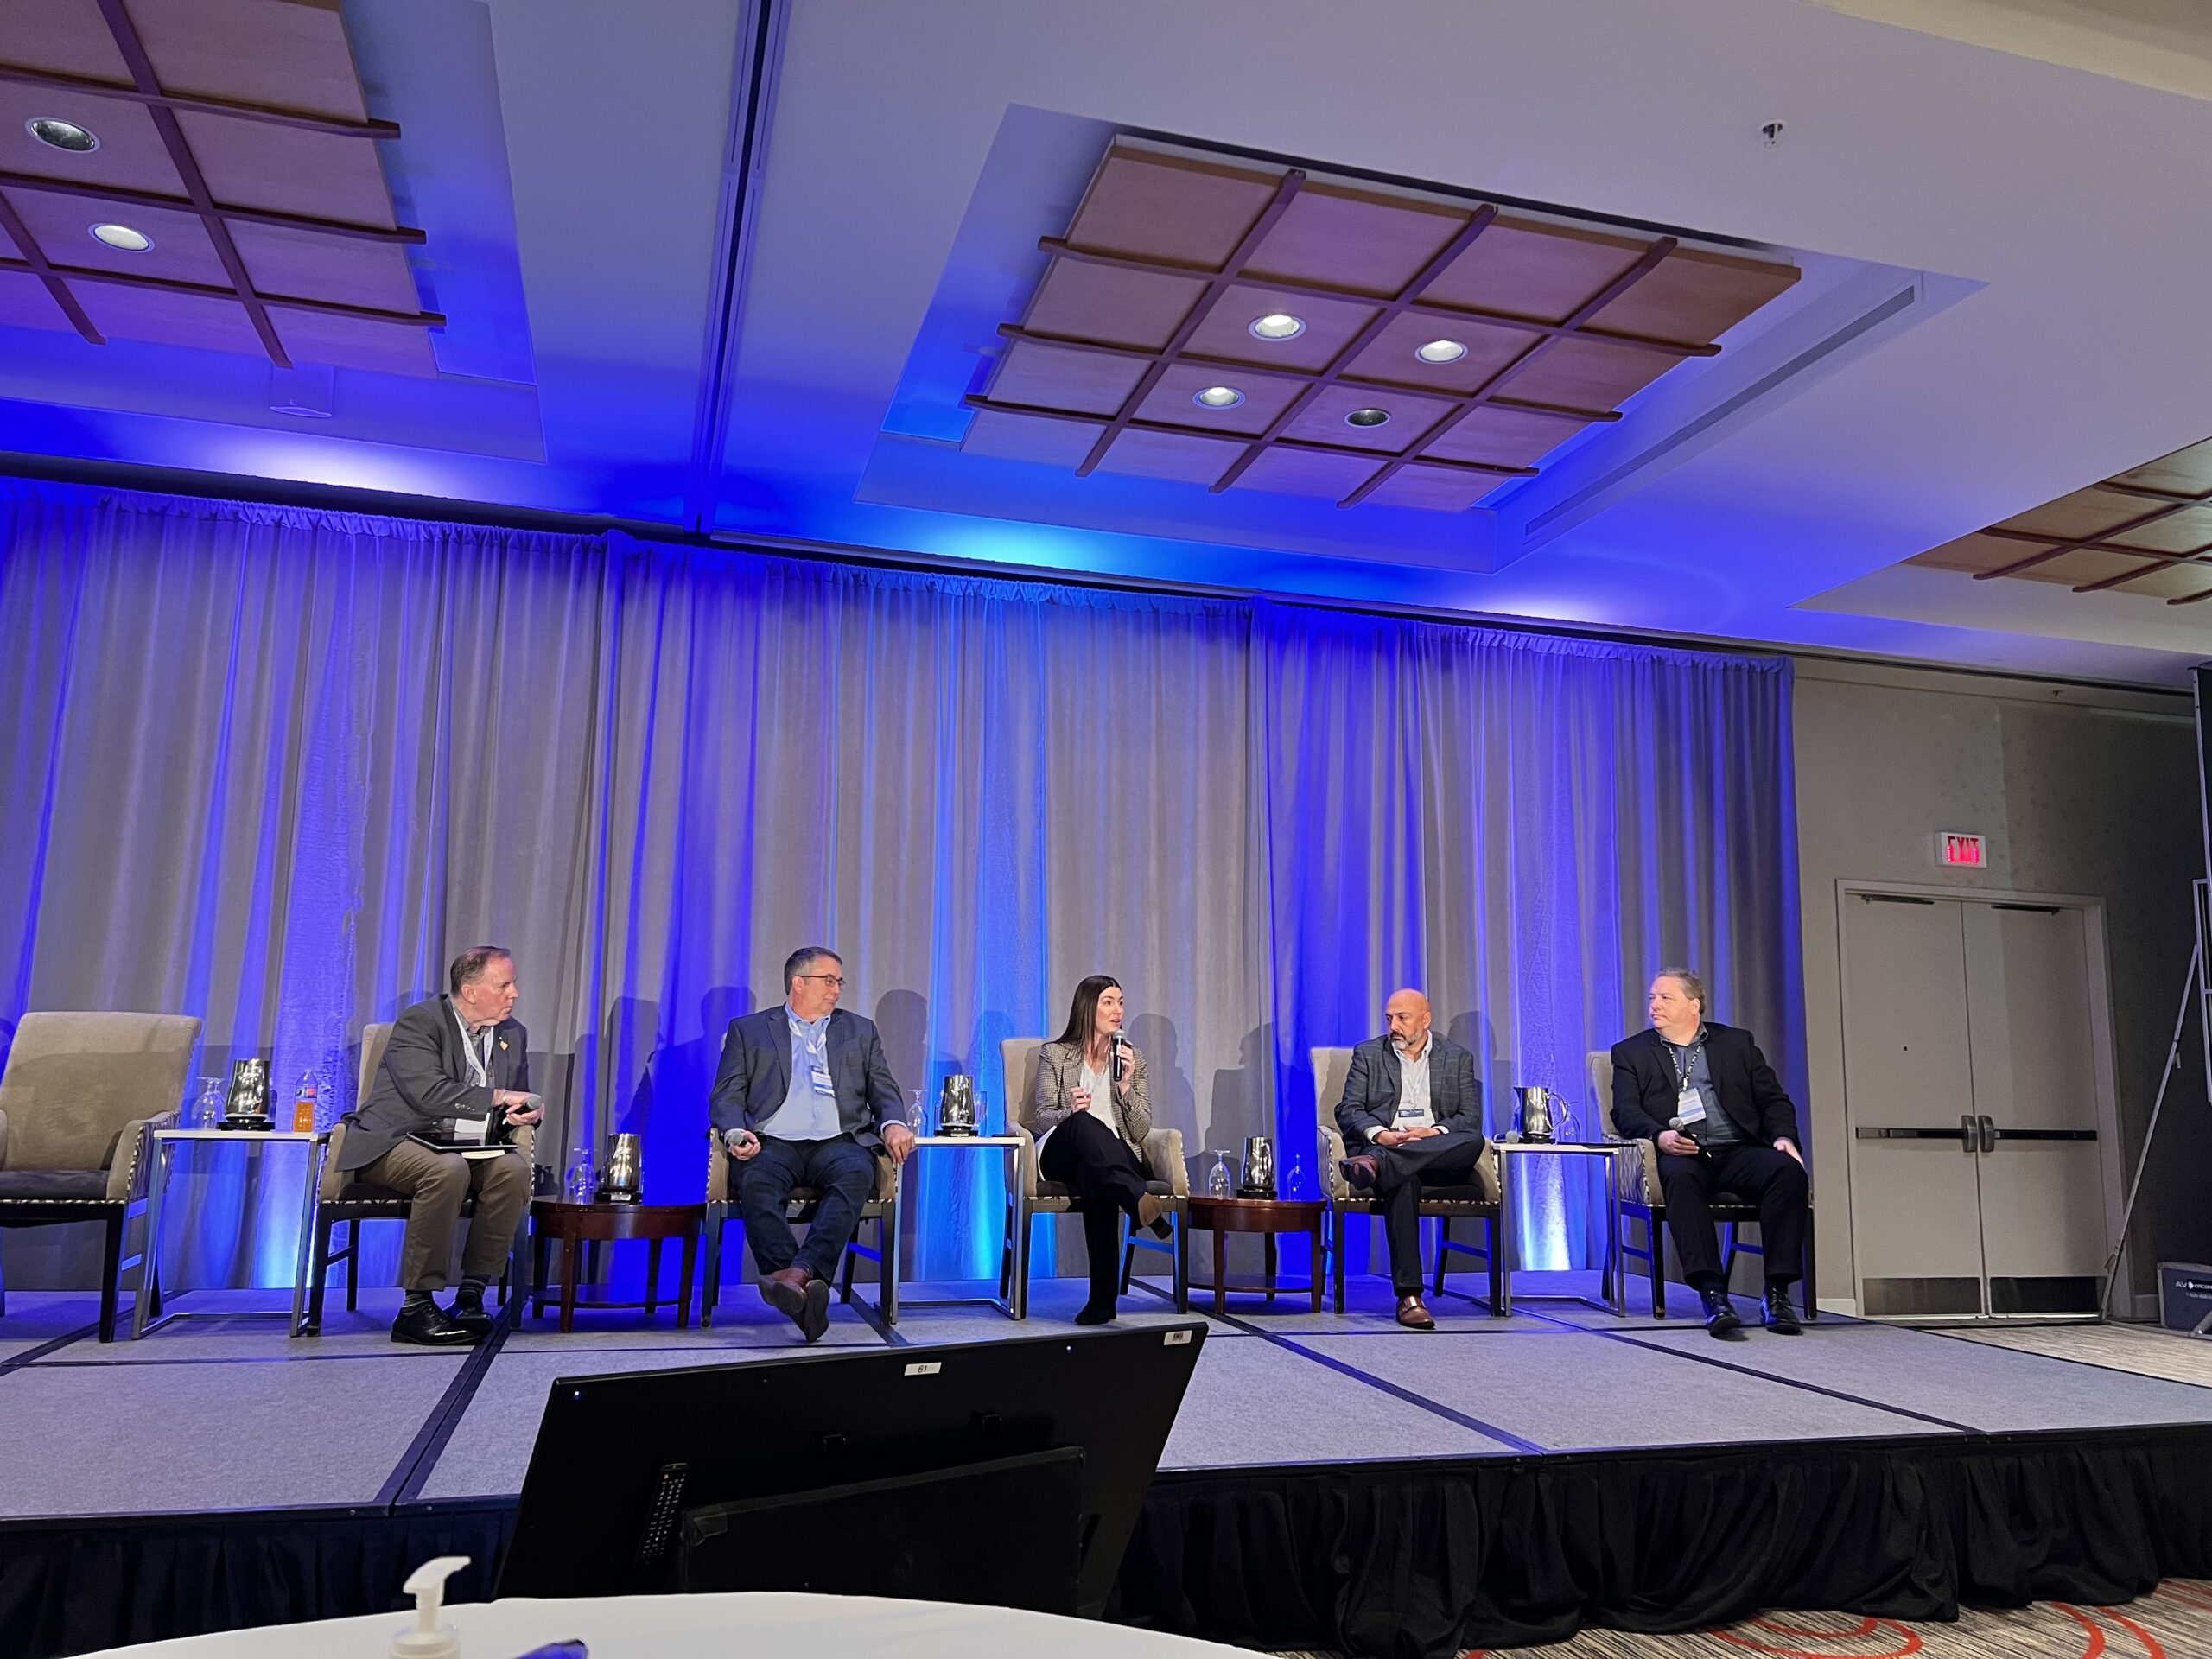 Enabling Electrification 4.0 featuring Francis Bradley (Electricity Canada), Bronwyn Lazowski (NRCan), Chris Mathis (Viable Solutions Inc.), Greg Robart (SGIN), and Terry Cormier (Mavome Inc.)